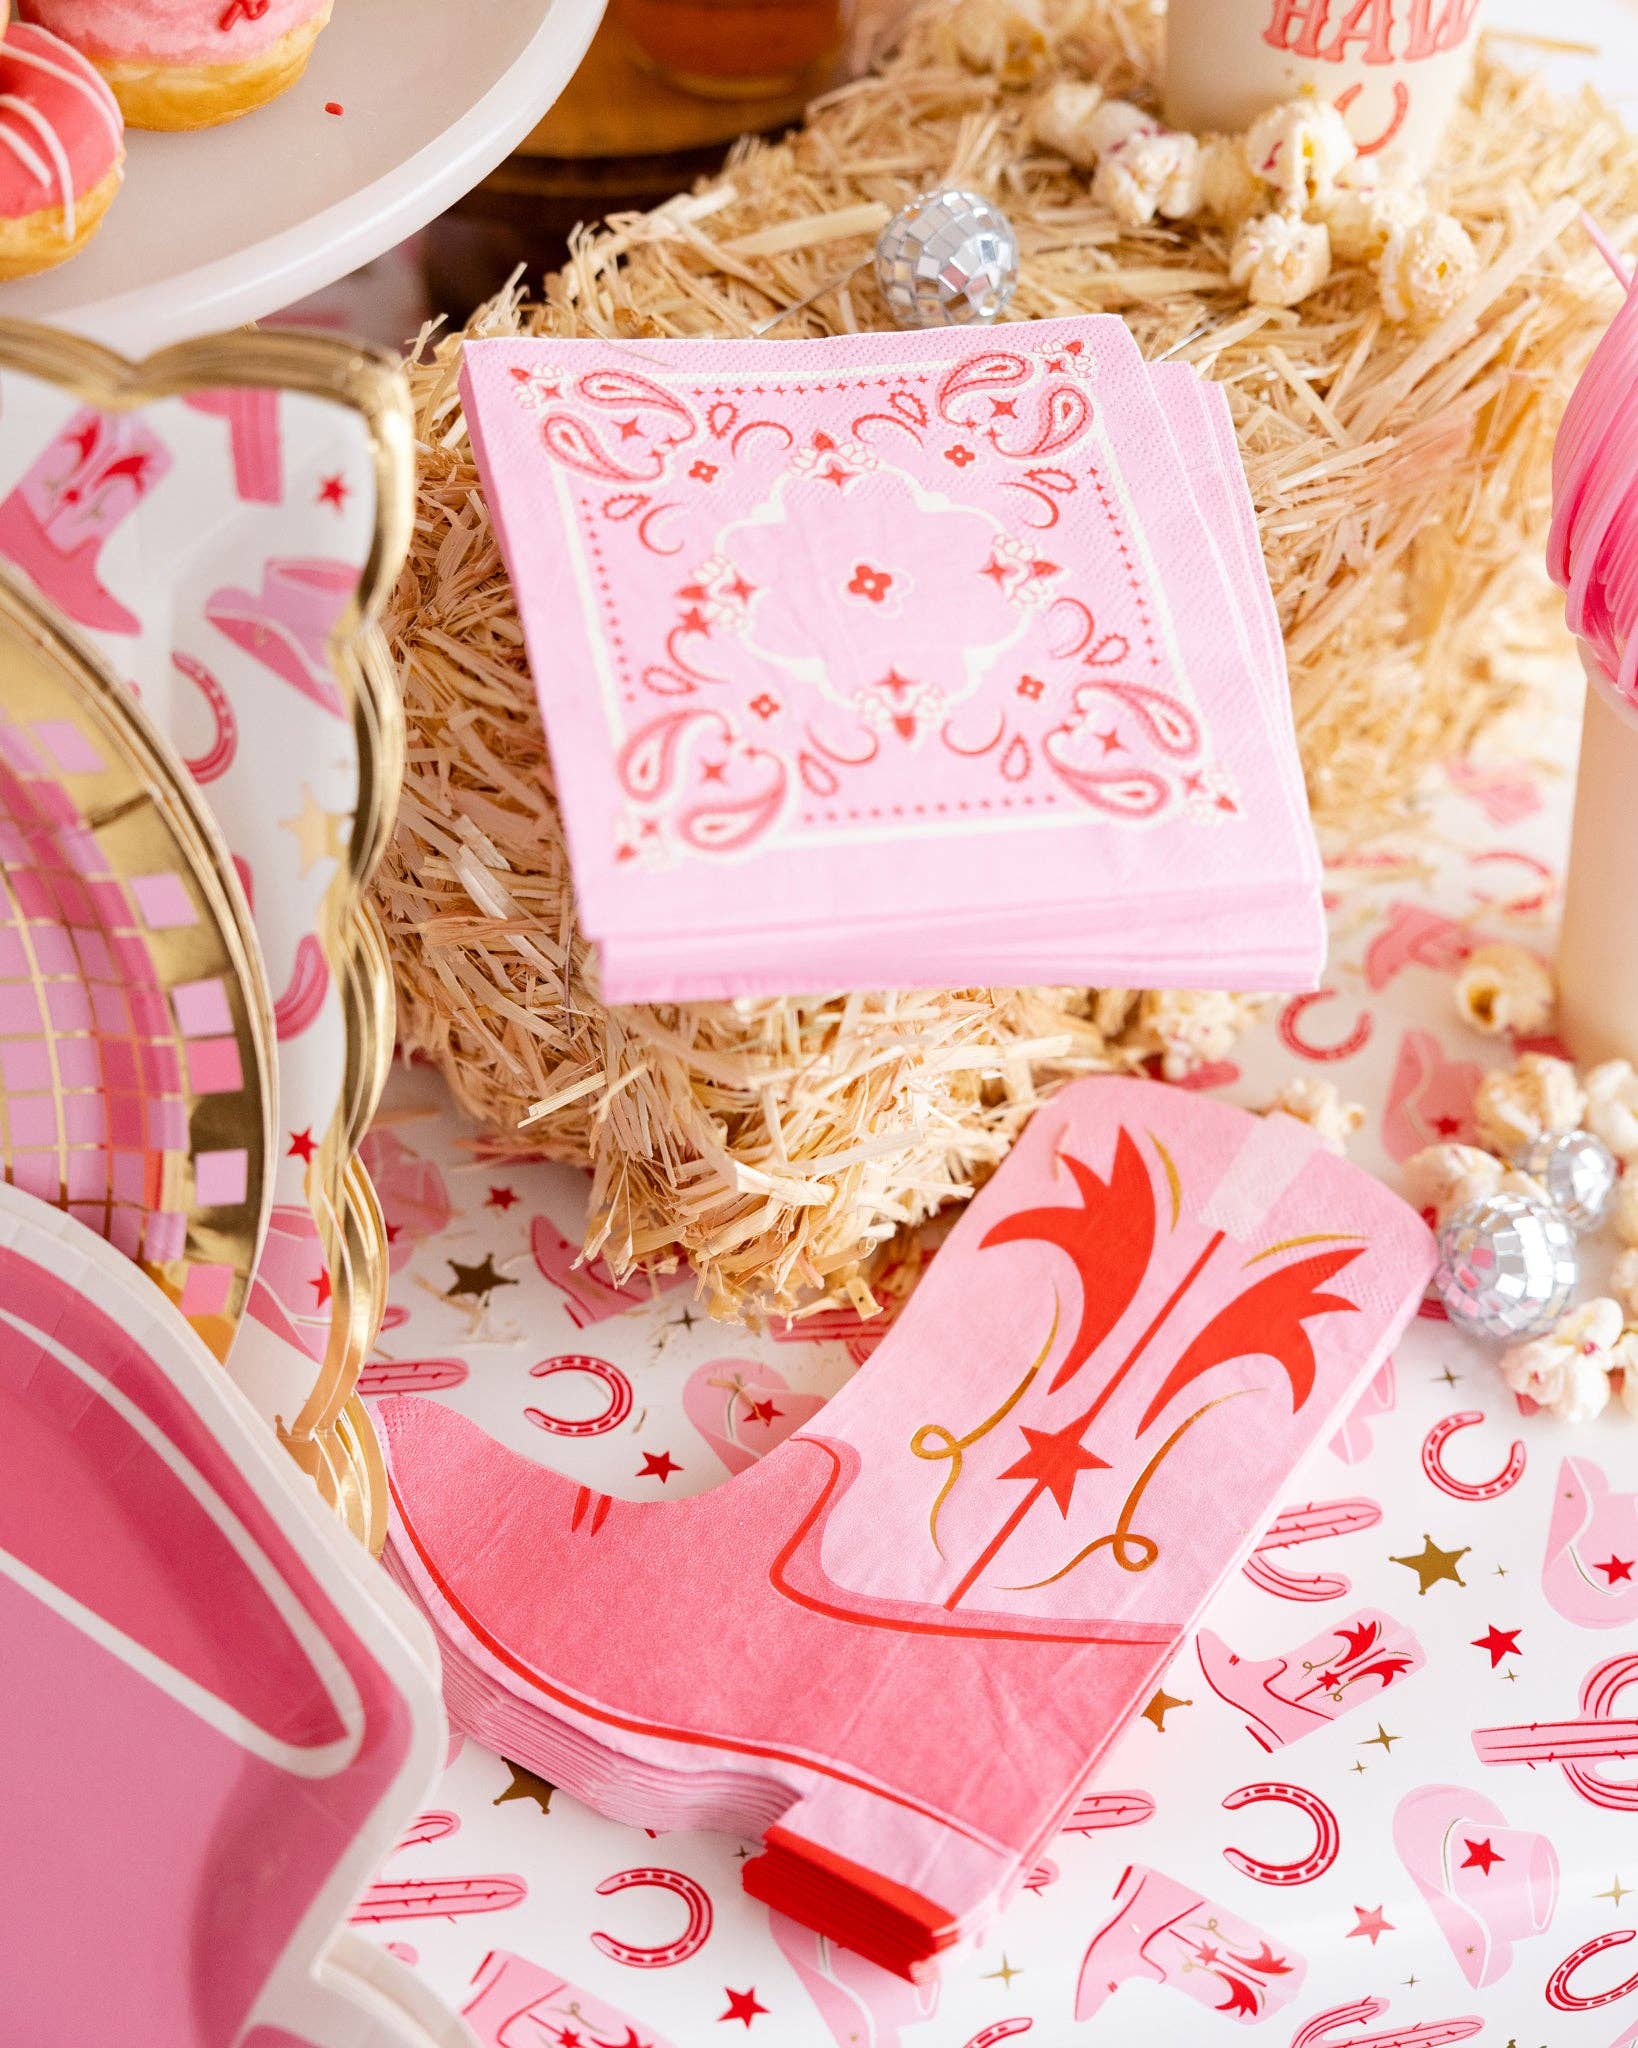 Pink Cowgirl Boot Napkins